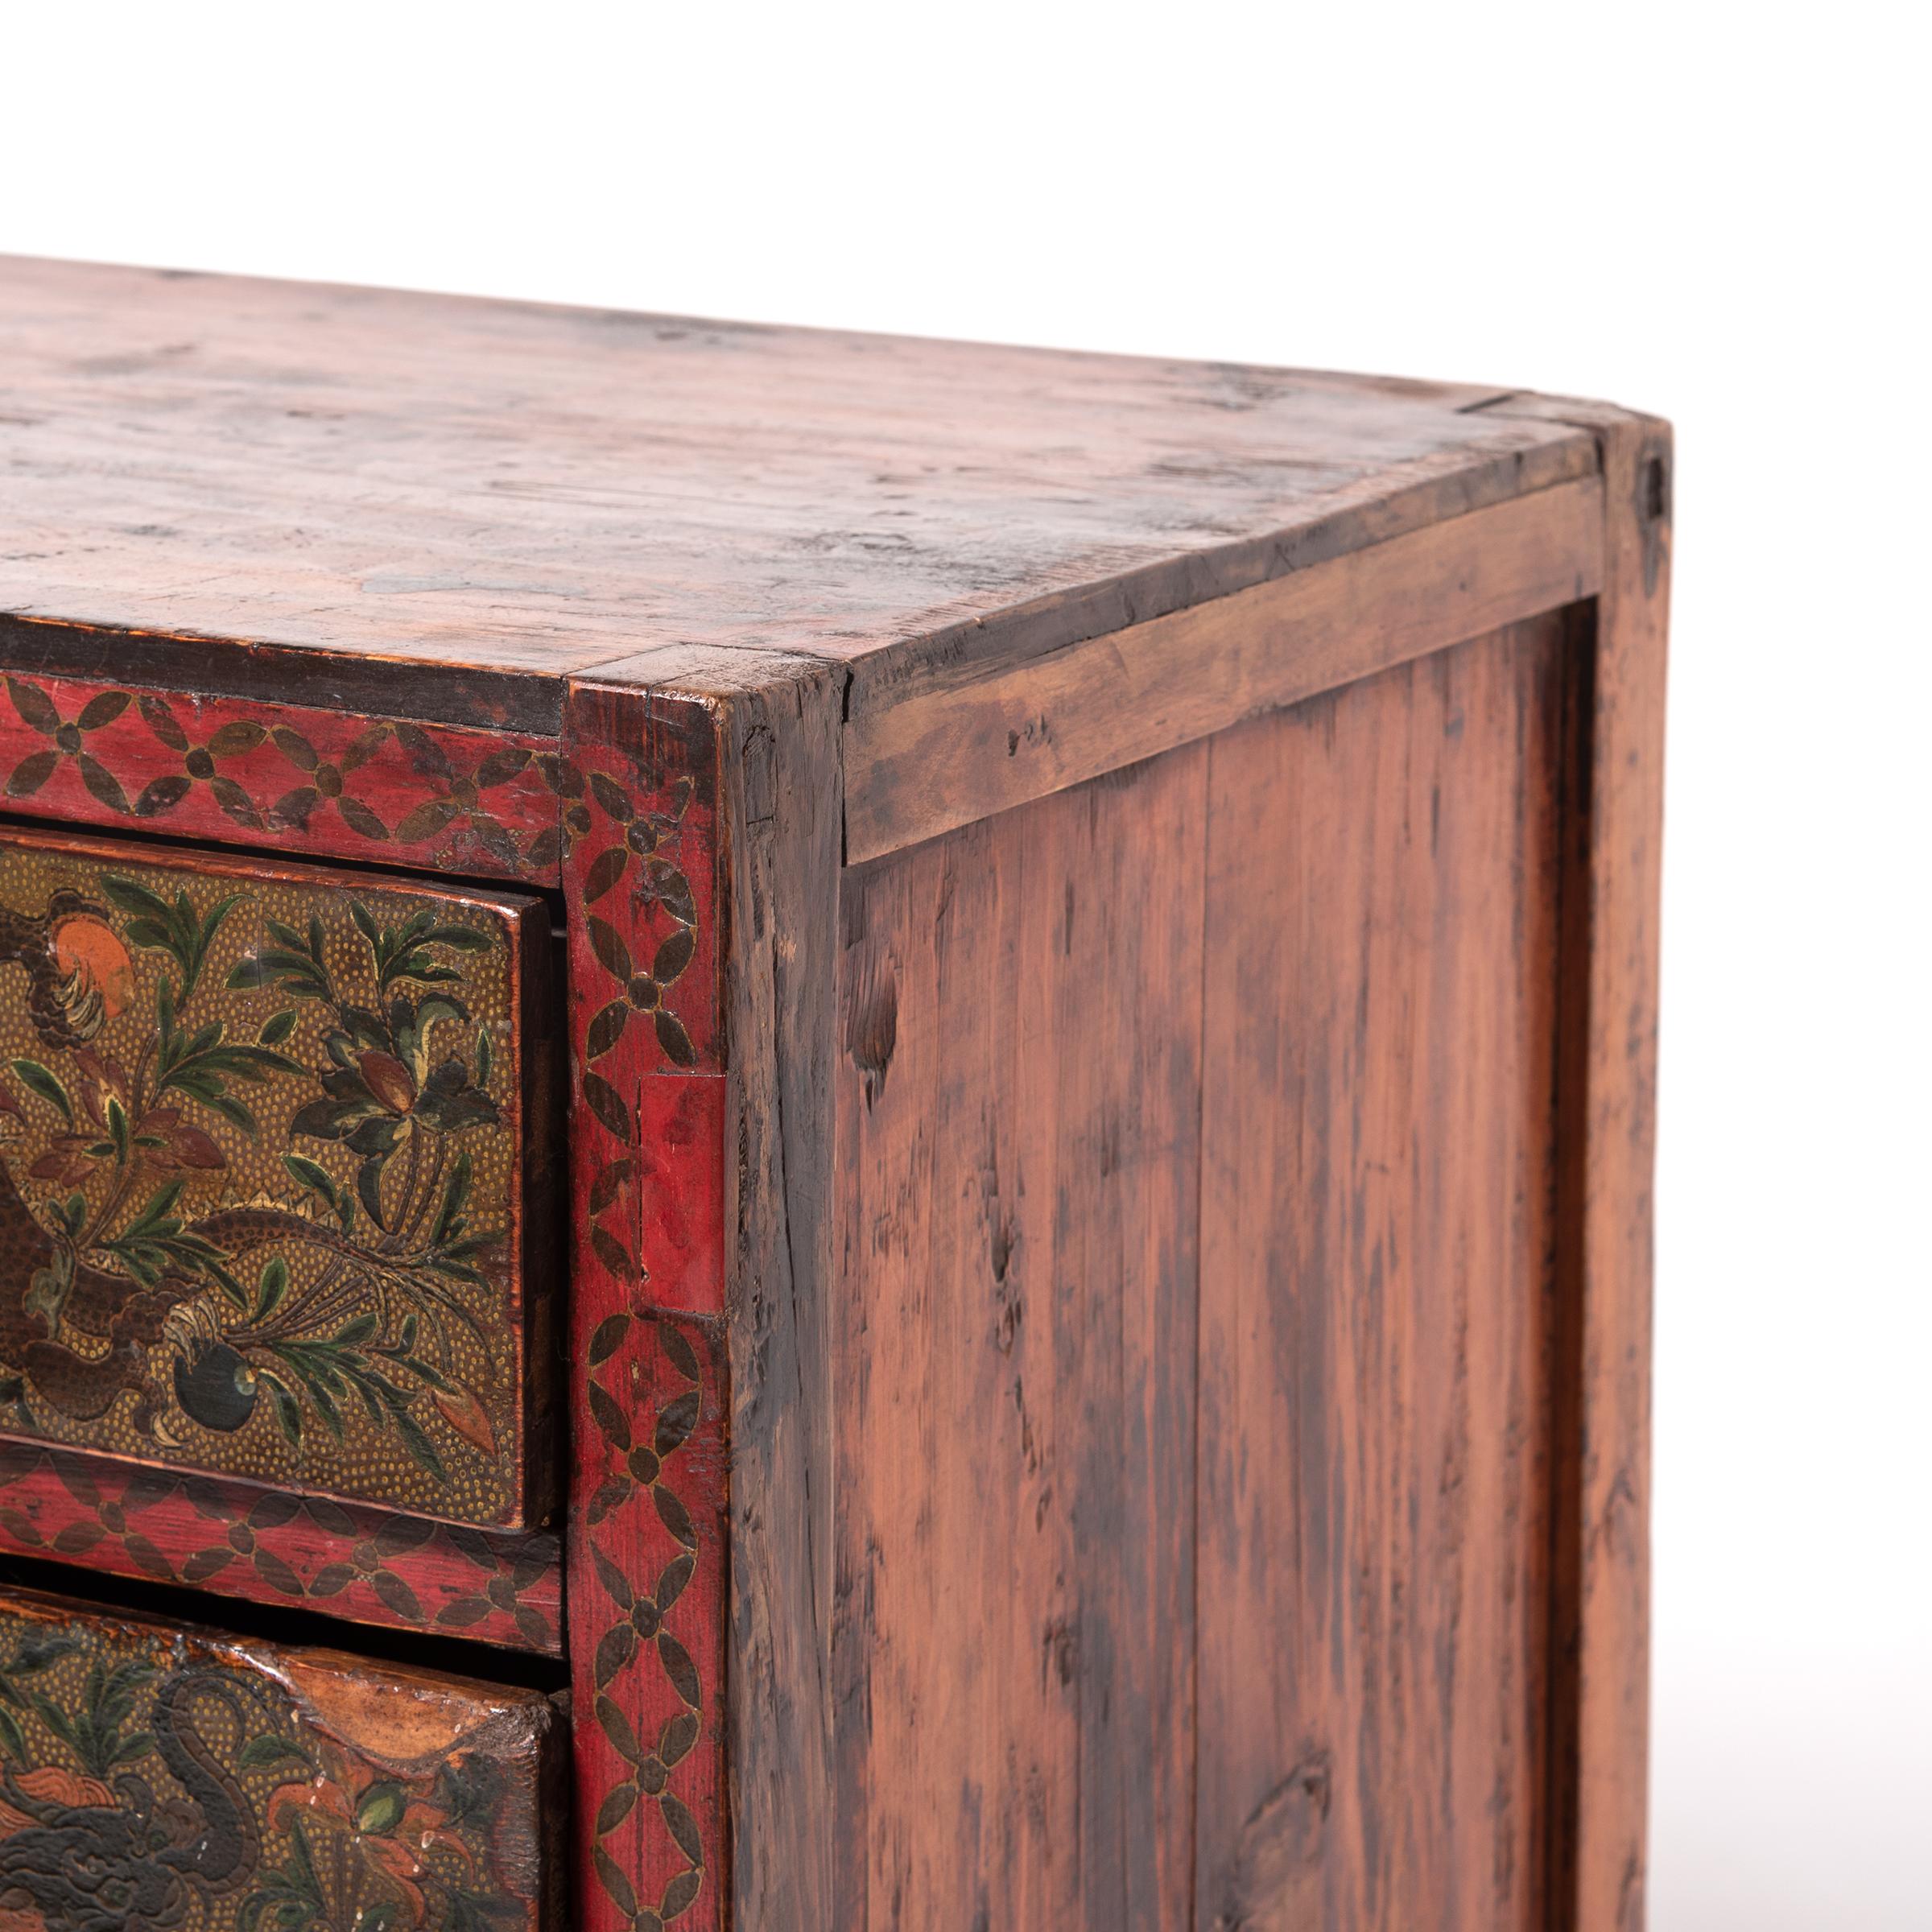 Tibetan Painted Dragon Chest of Drawers, c. 1850 For Sale 1